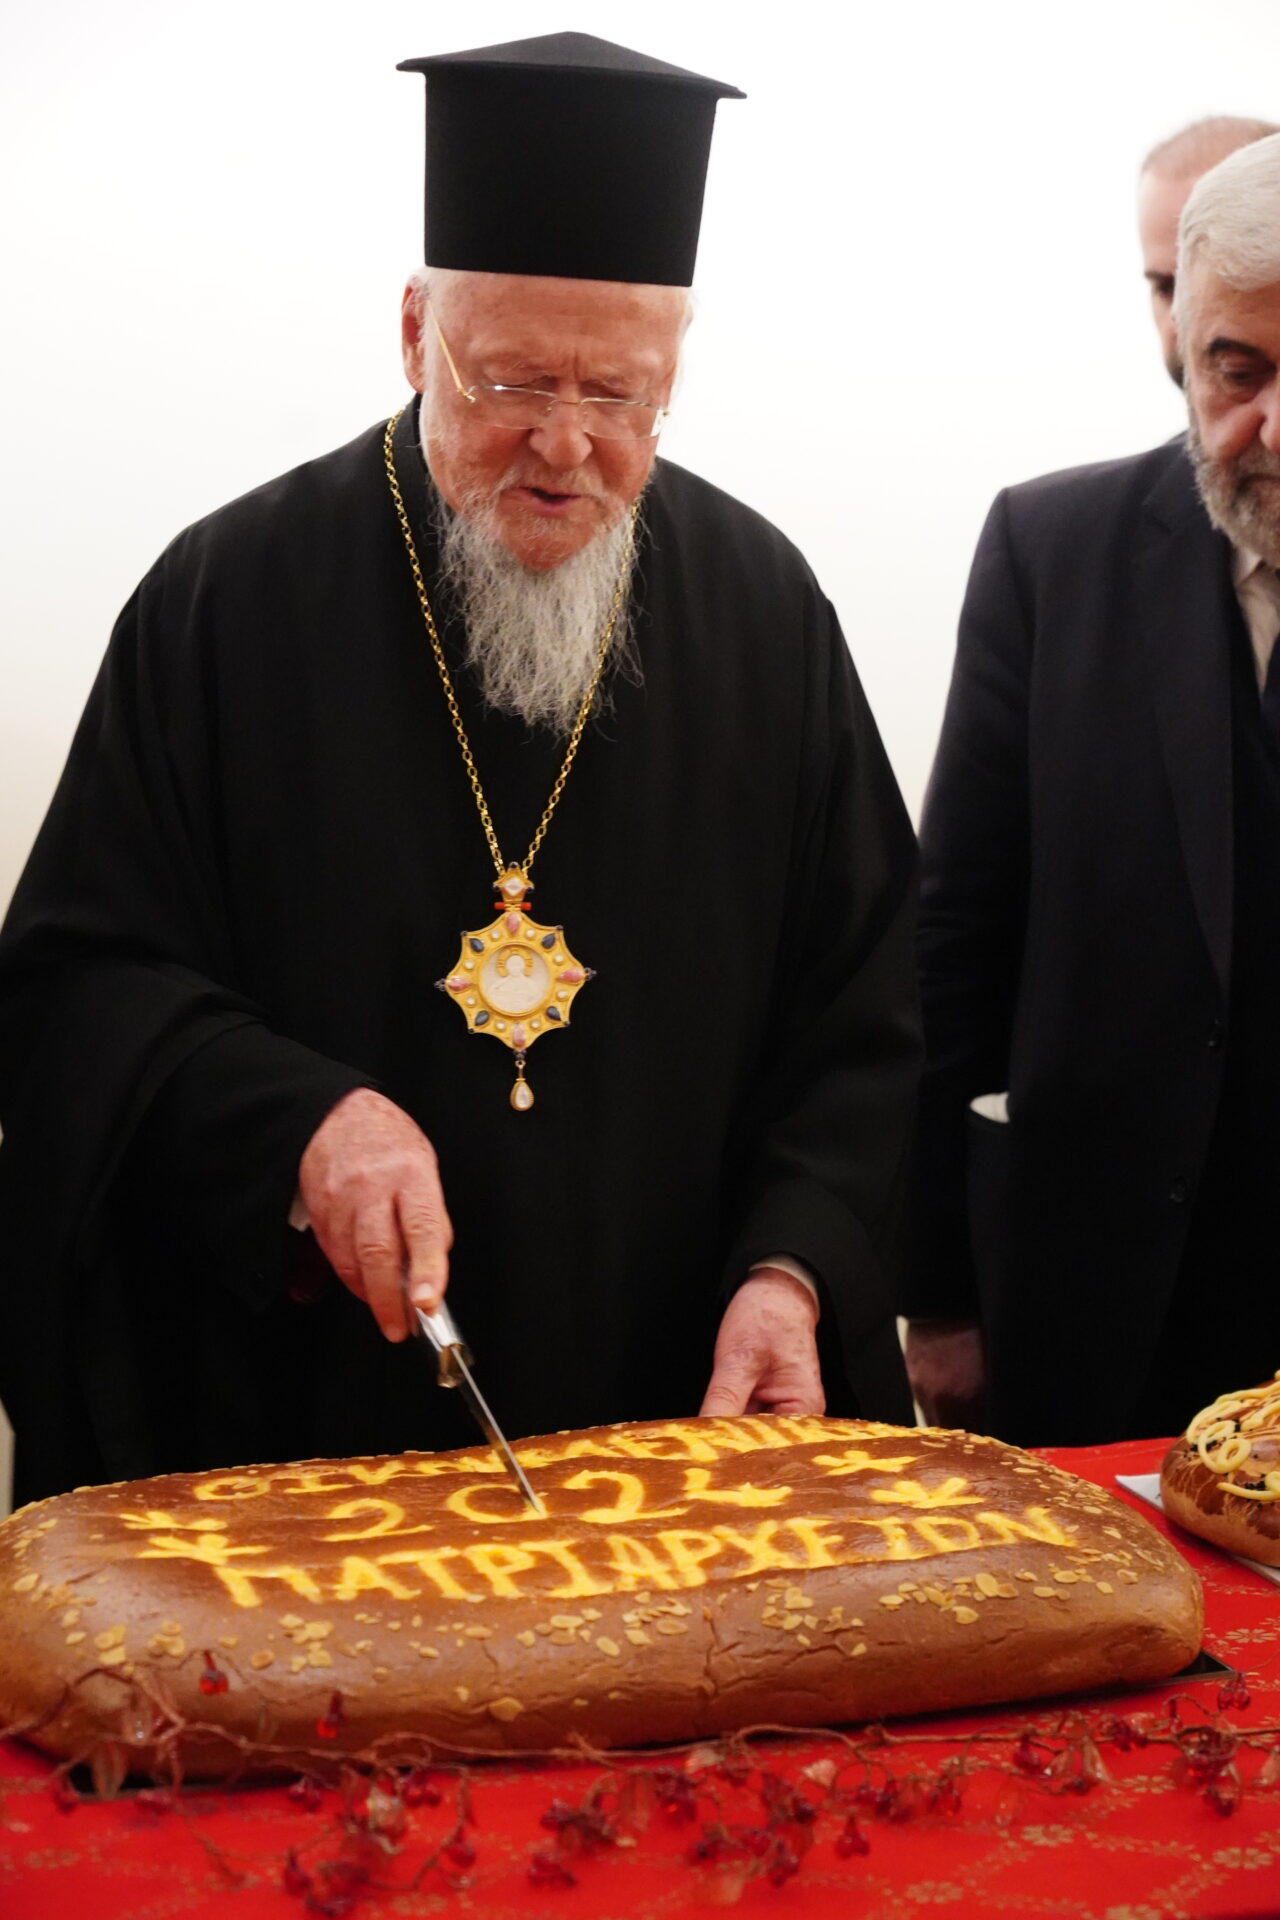 Ecumenical Patriarch Bartholomew: “We dedicate ourselves to the pursuit of peace and reconciliation”